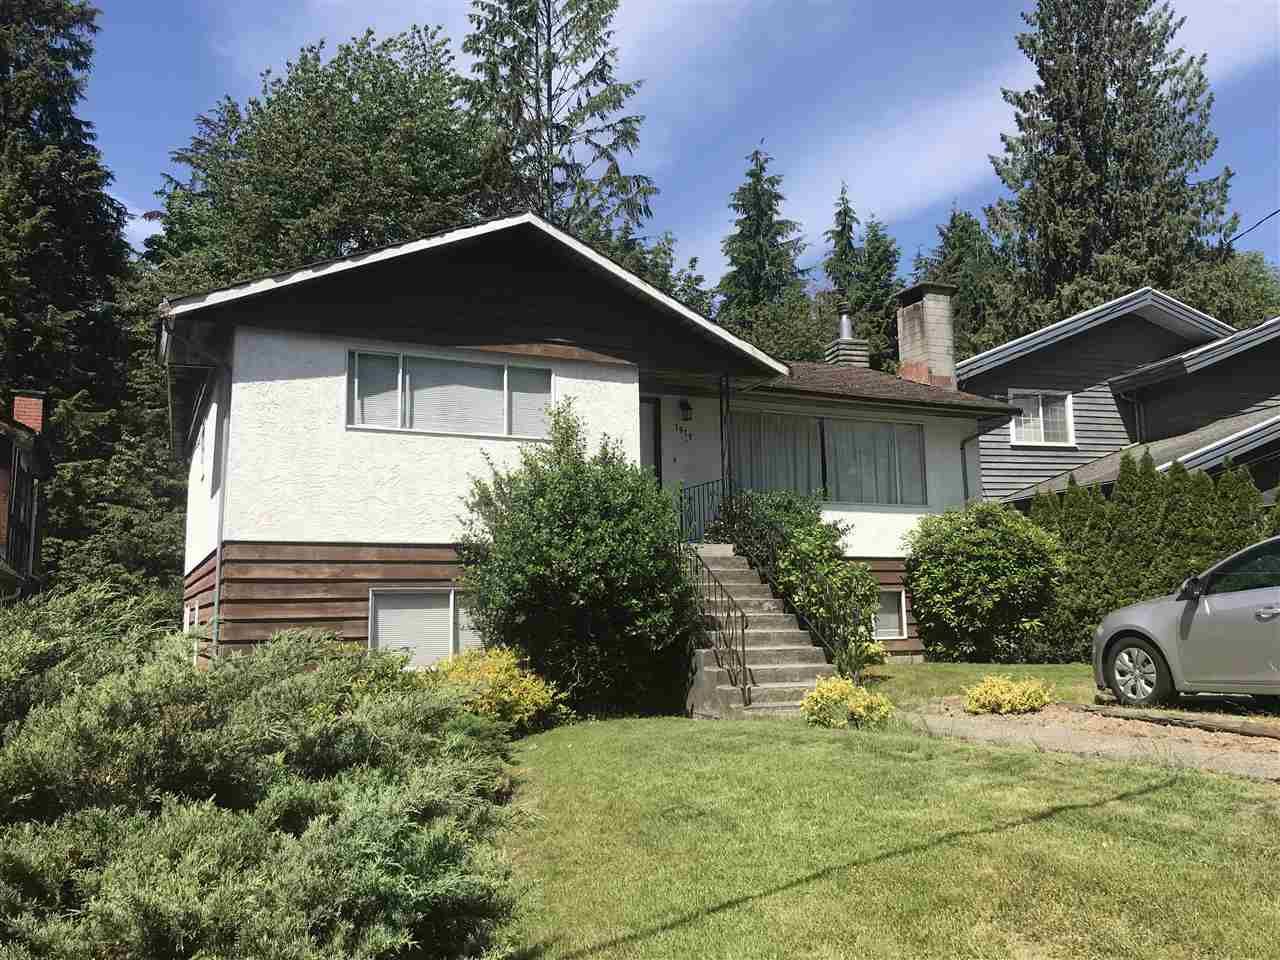 I have sold a property at 1919 PANORAMA DRIVE
